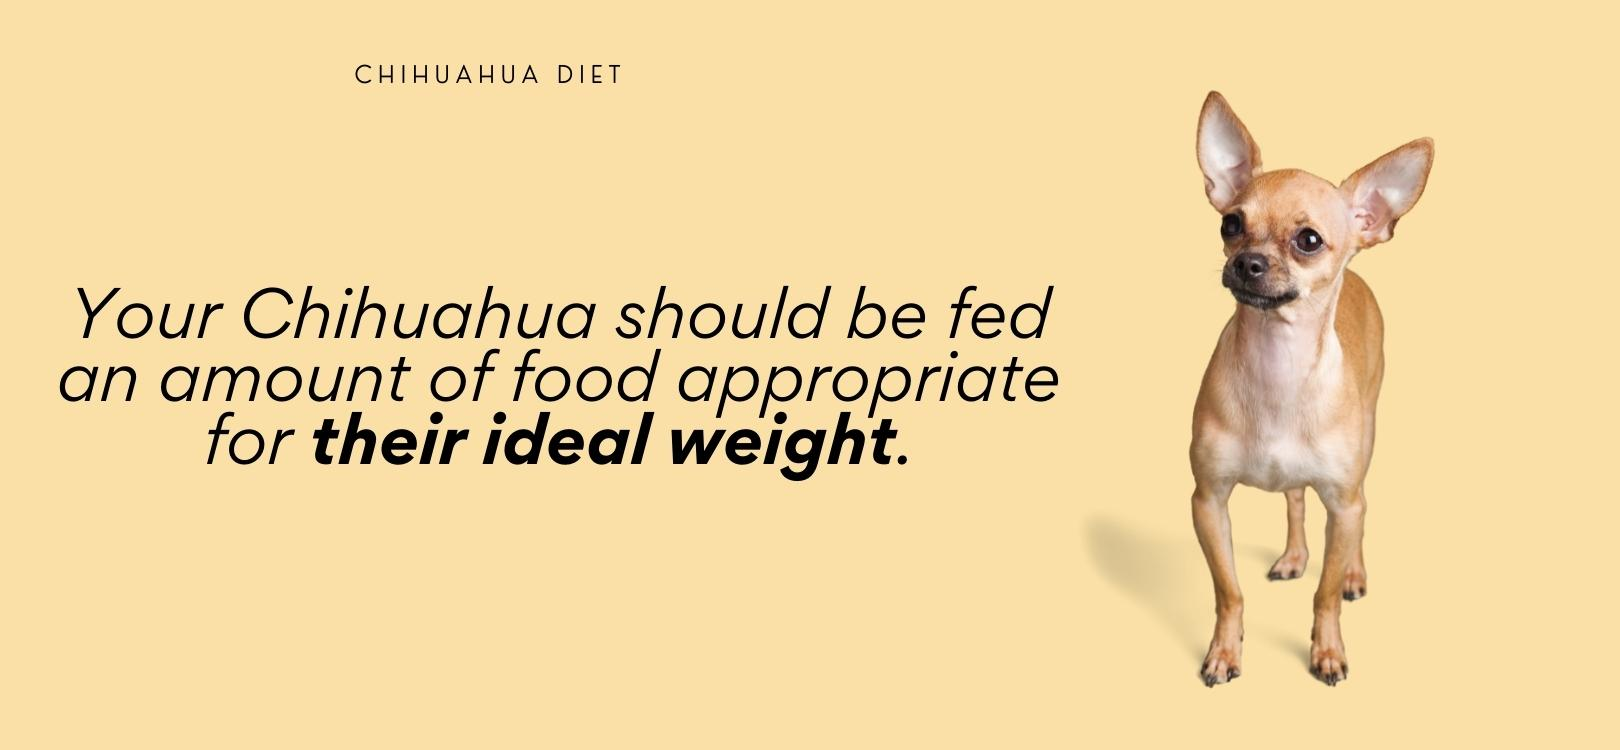 how much food should a chihuahua eat